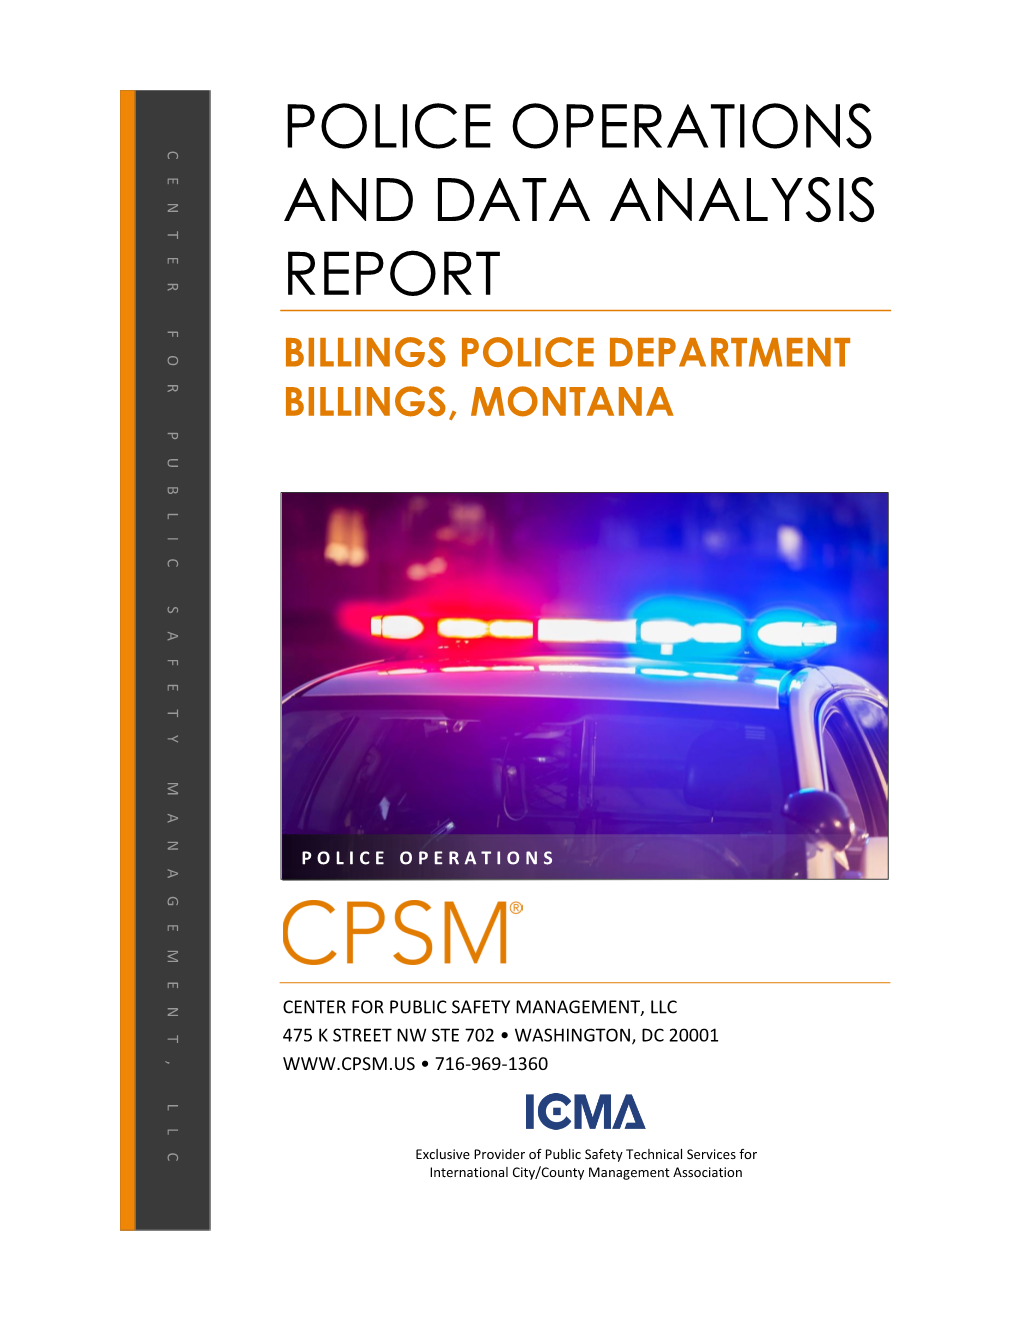 Police Operations and Data Analysis Report Billings Police Department Billings, Montana